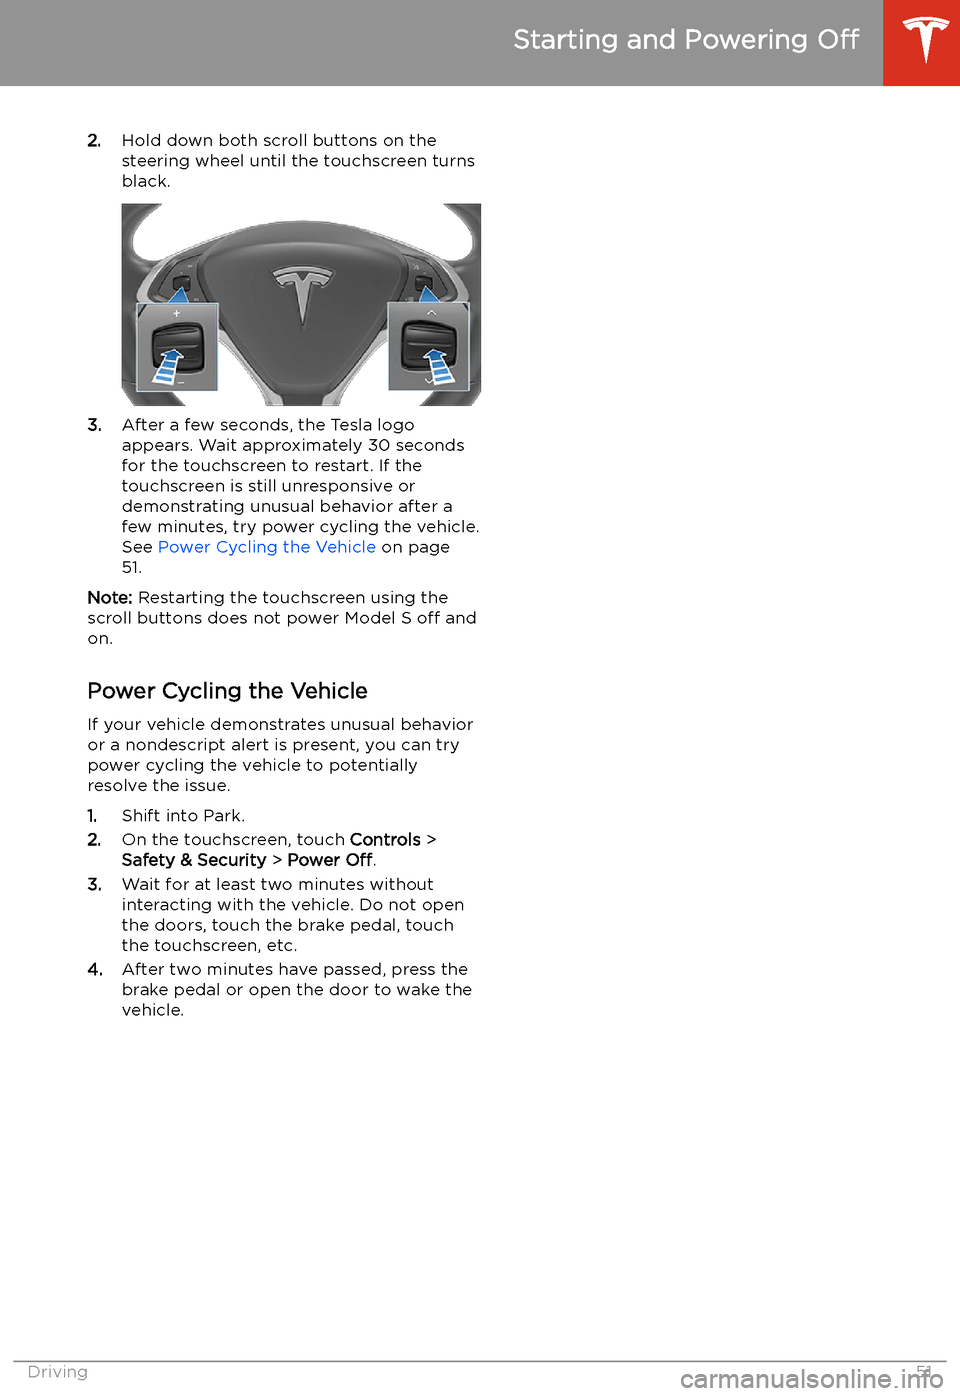 TESLA MODEL S 2020  Owners Manual 2.Hold down both scroll buttons on the
steering wheel until the touchscreen turns
black.
3. After a few seconds, the Tesla logo
appears. Wait approximately 30 seconds
for the touchscreen to restart. I